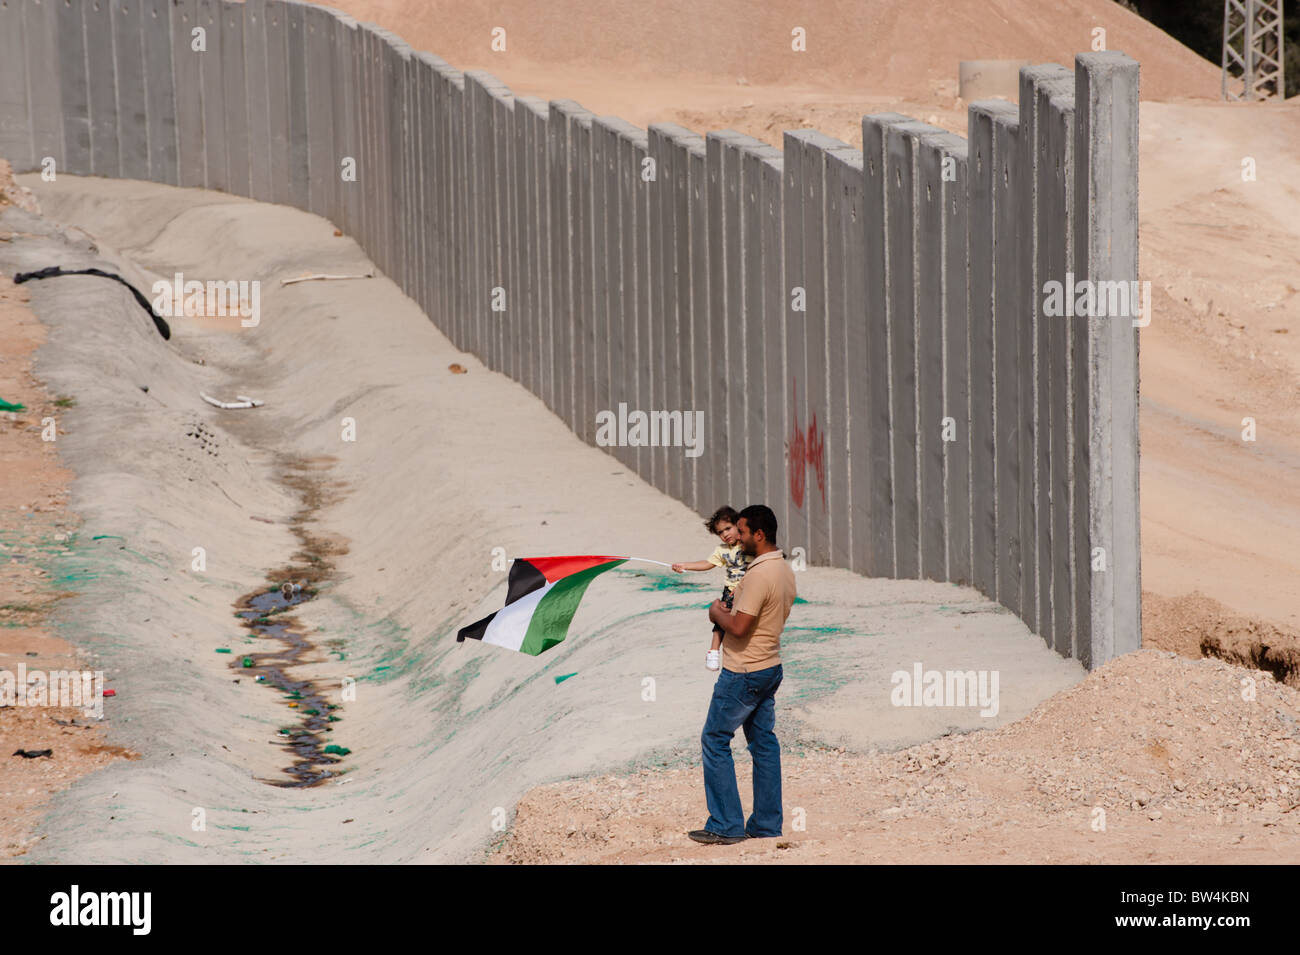 Father and daughter waving a Palestinian flag stand near the Israeli separation barrier being constructed in the West Bank. Stock Photo